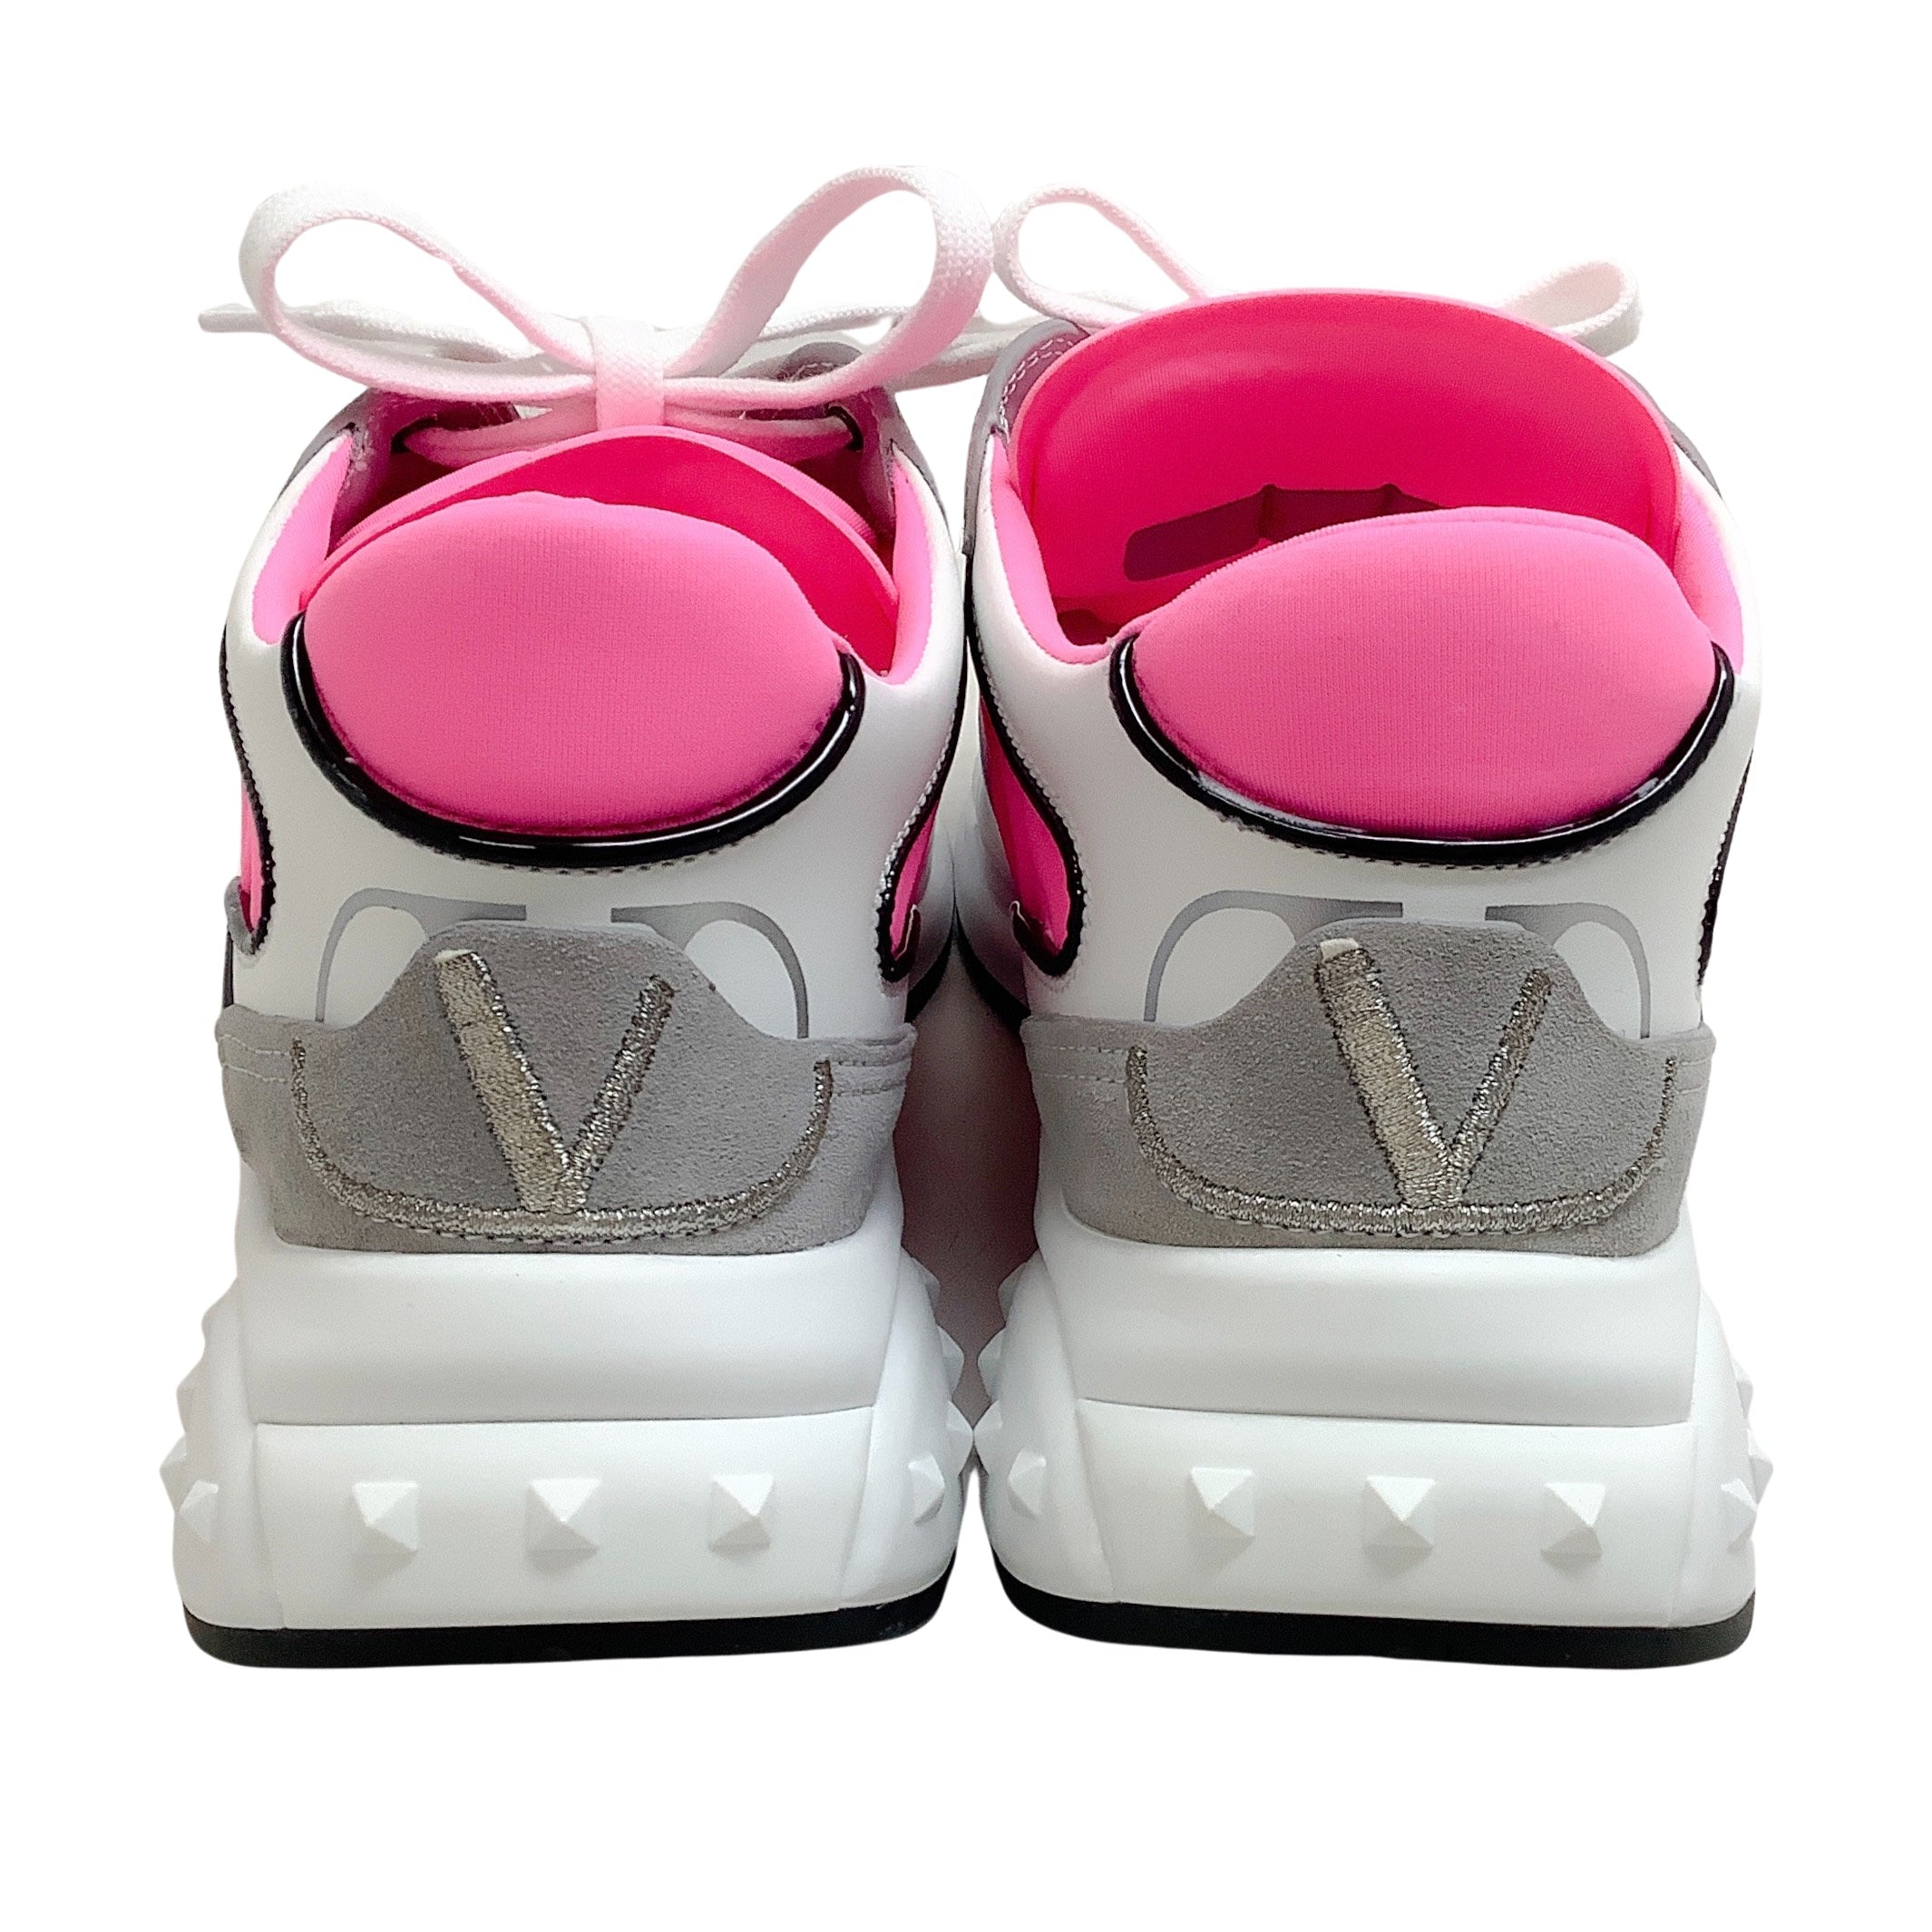 Valentino Grey / Pink Ready Go Runner Sneakers